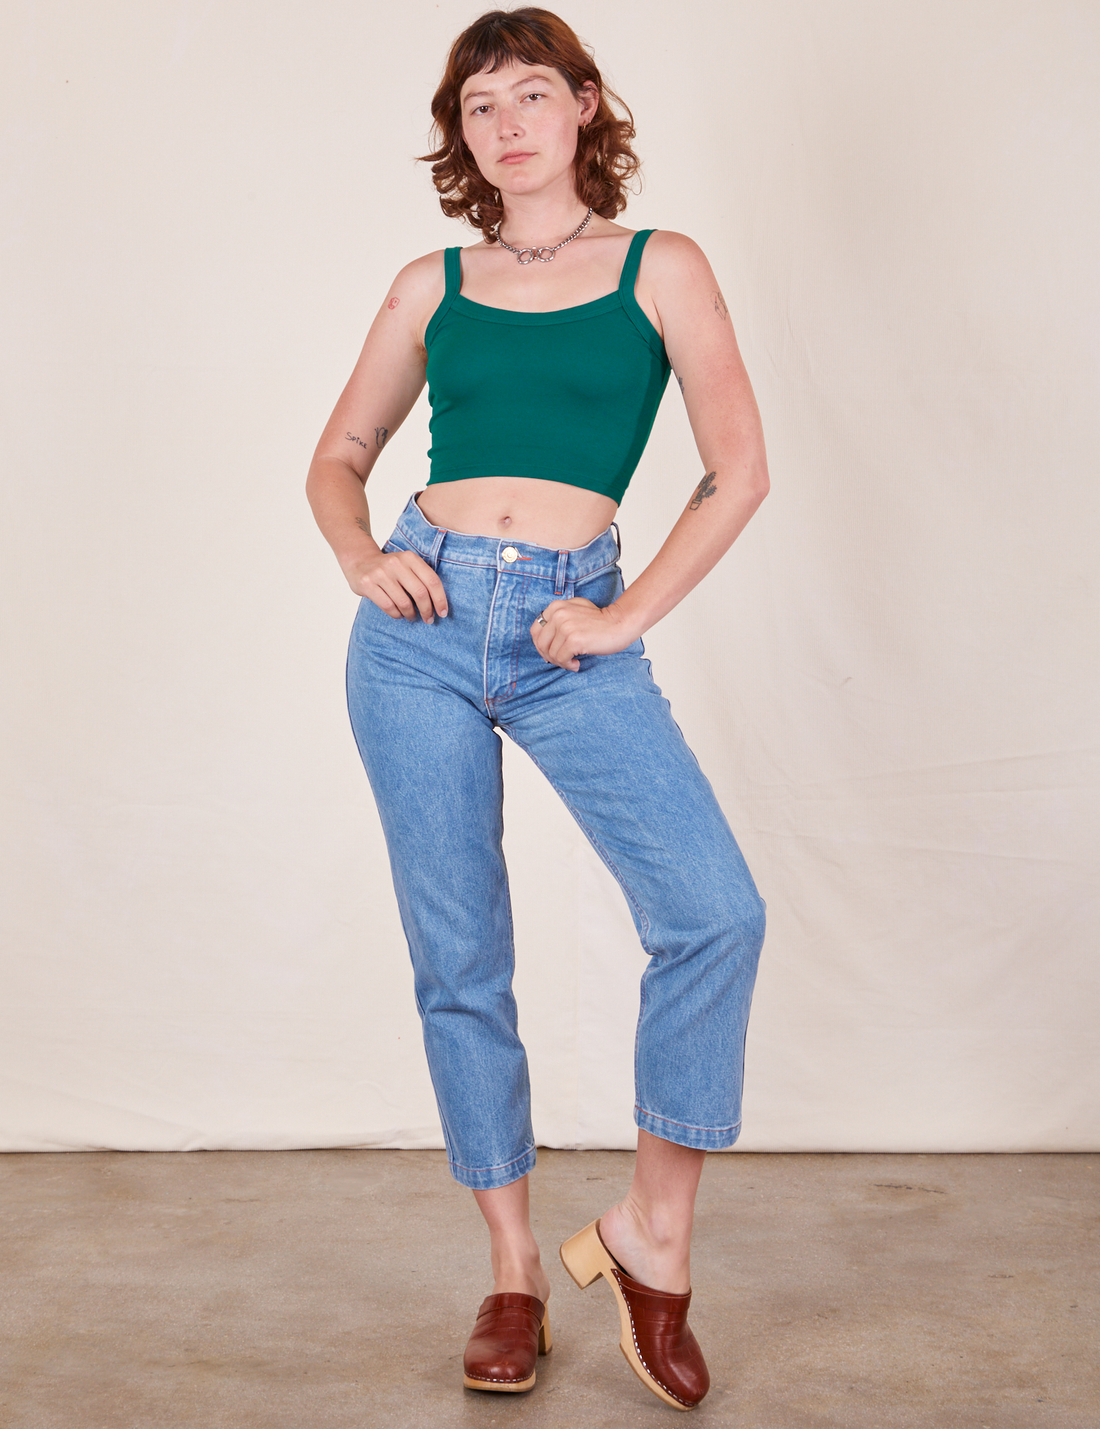 Alex is wearing Cropped Cami in Hunter Green and light wash Frontier Jeans